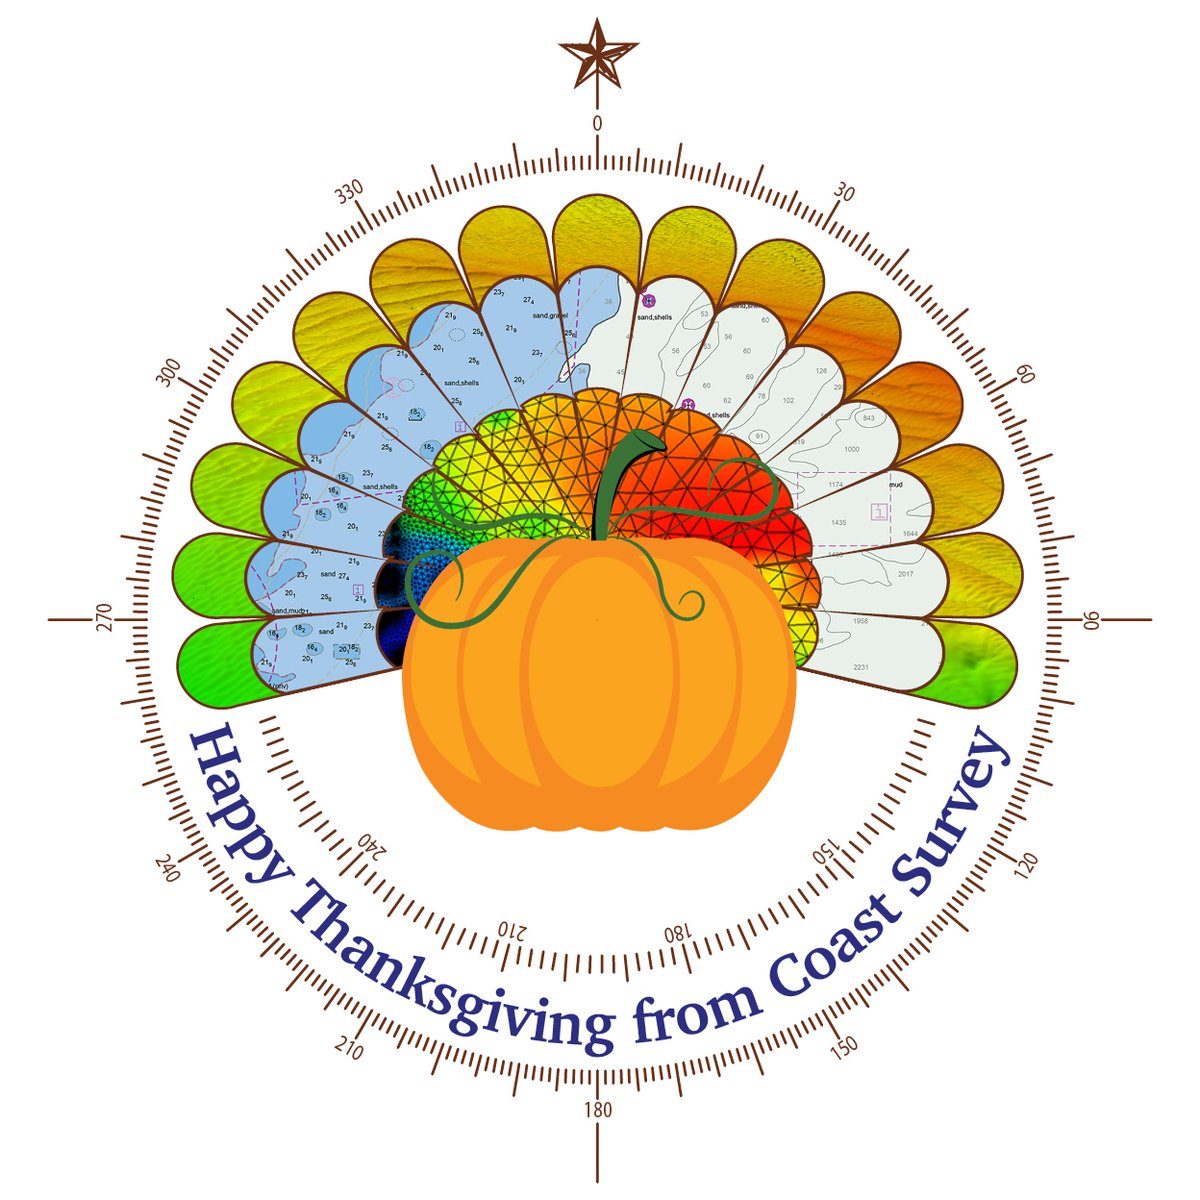 Cardinal directions🐦or . . . turkey directions 🦃? Bird jokes (and dad jokes) aside, we at Coast Survey are wishing you a very happy Thanksgiving holiday. #happythanksgiving2023 #Thanksgiving